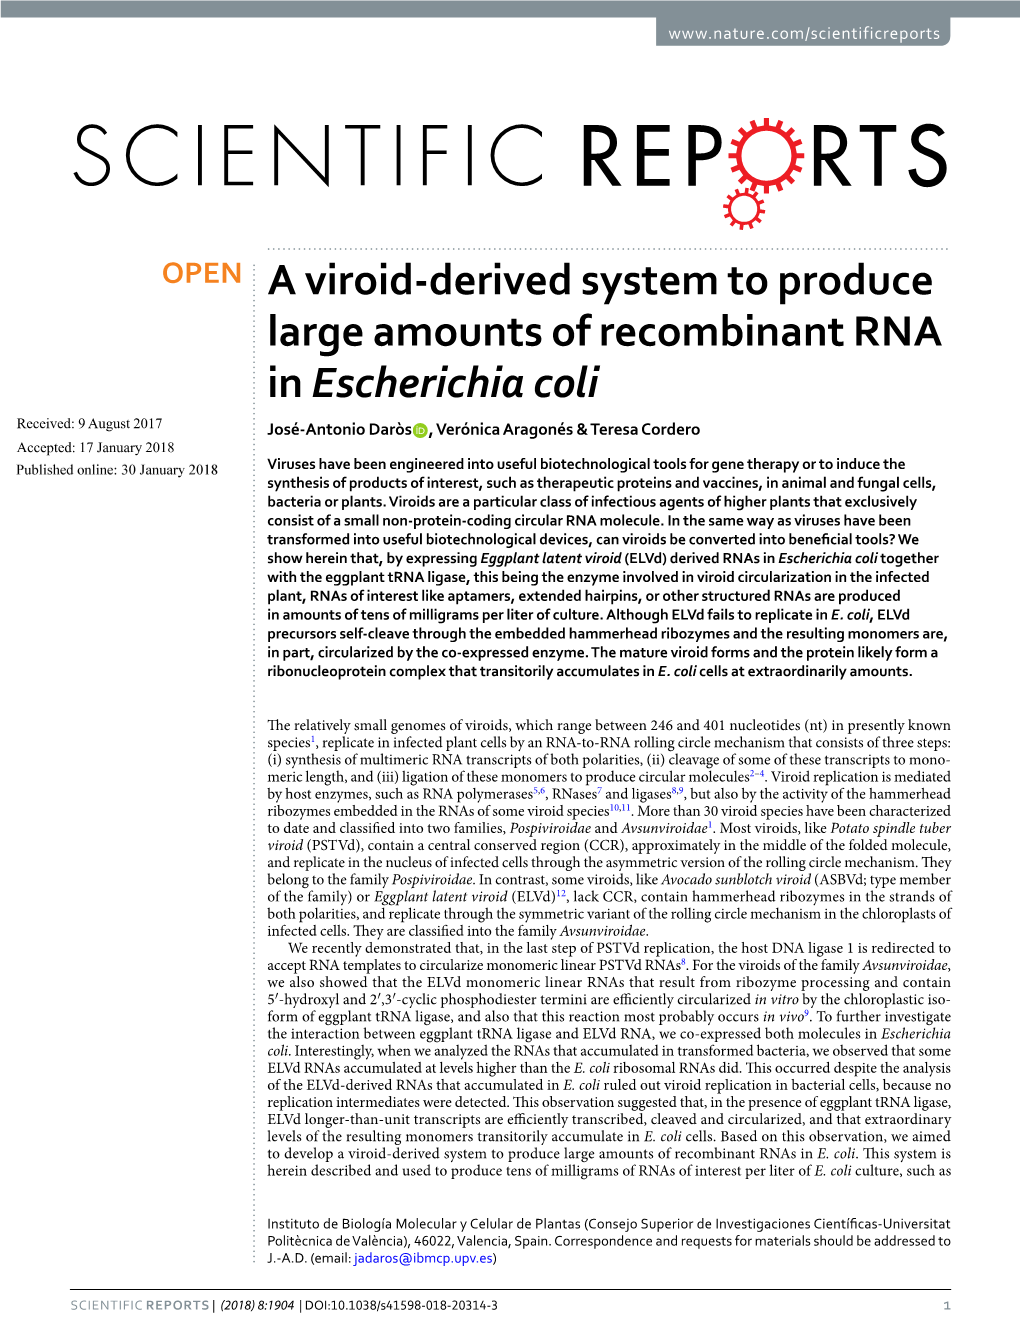 A Viroid-Derived System to Produce Large Amounts of Recombinant RNA